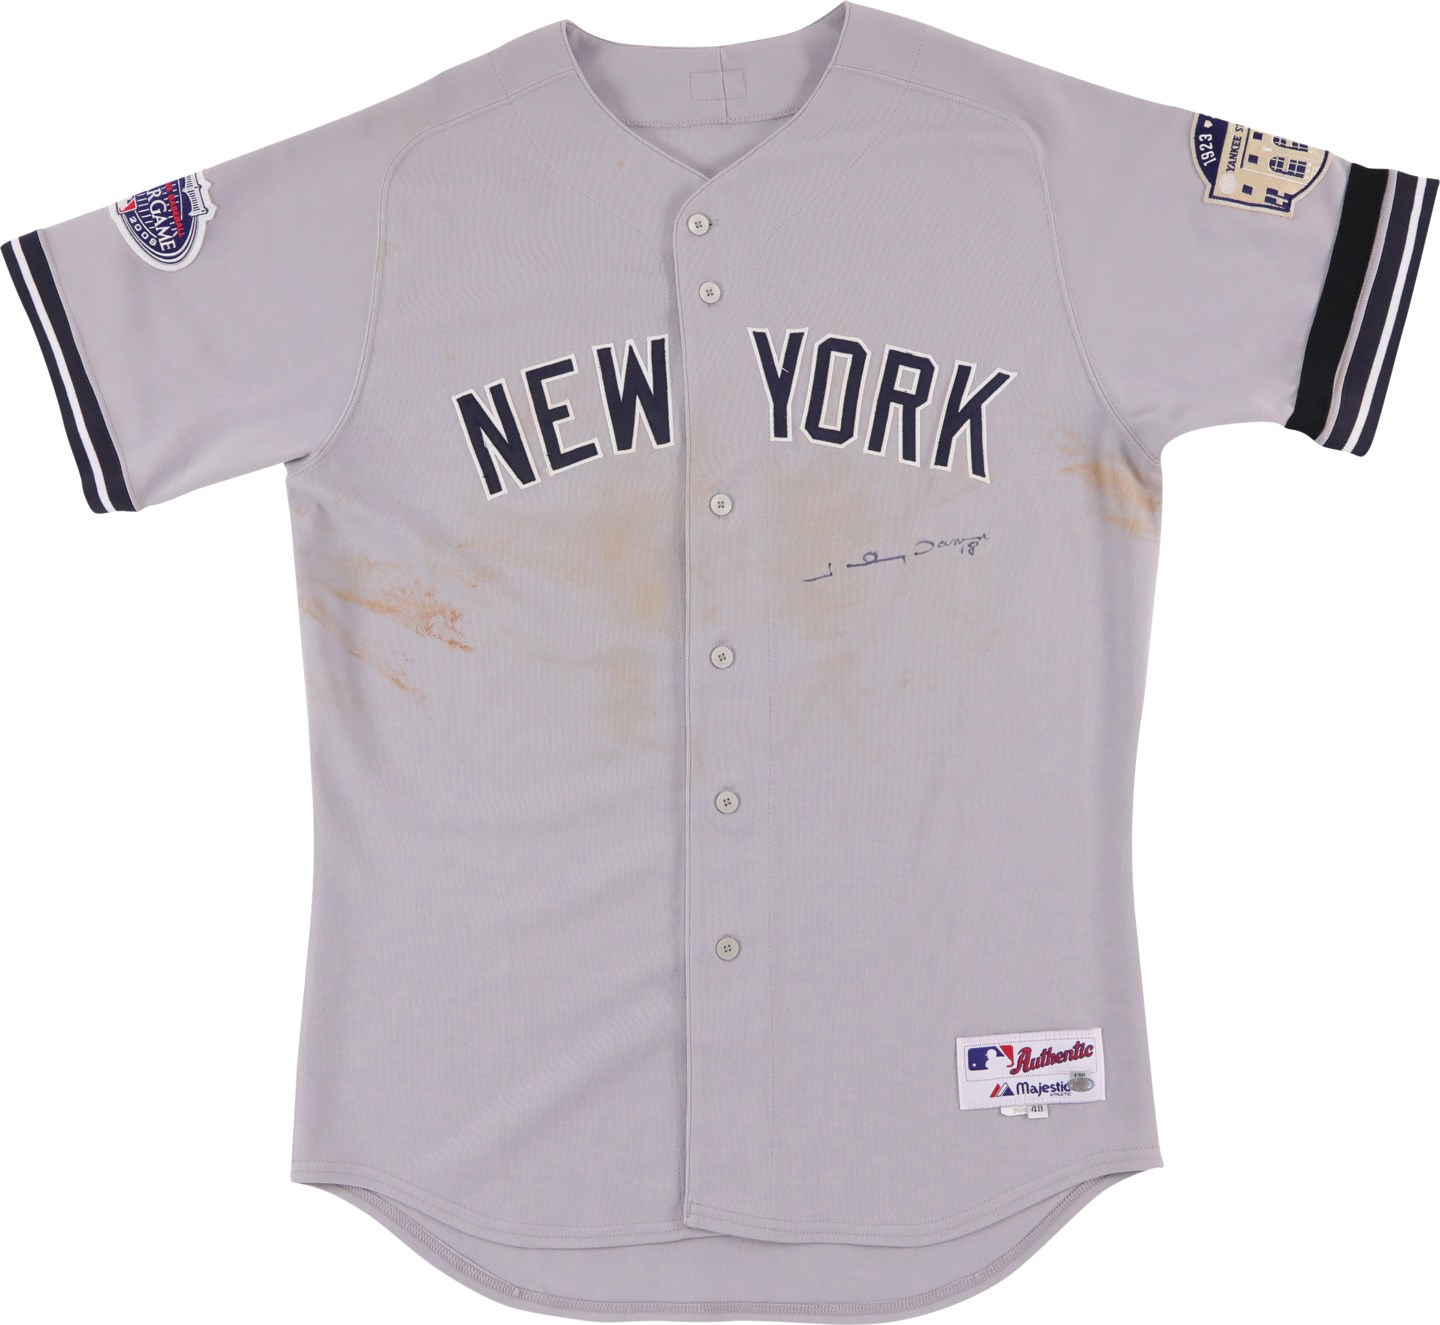 - 2008 Johnny Damon Unwashed "Two-Home Run" New York Yankees Signed Game Worn Jersey (Photo-Matched to Three Games & Steiner)